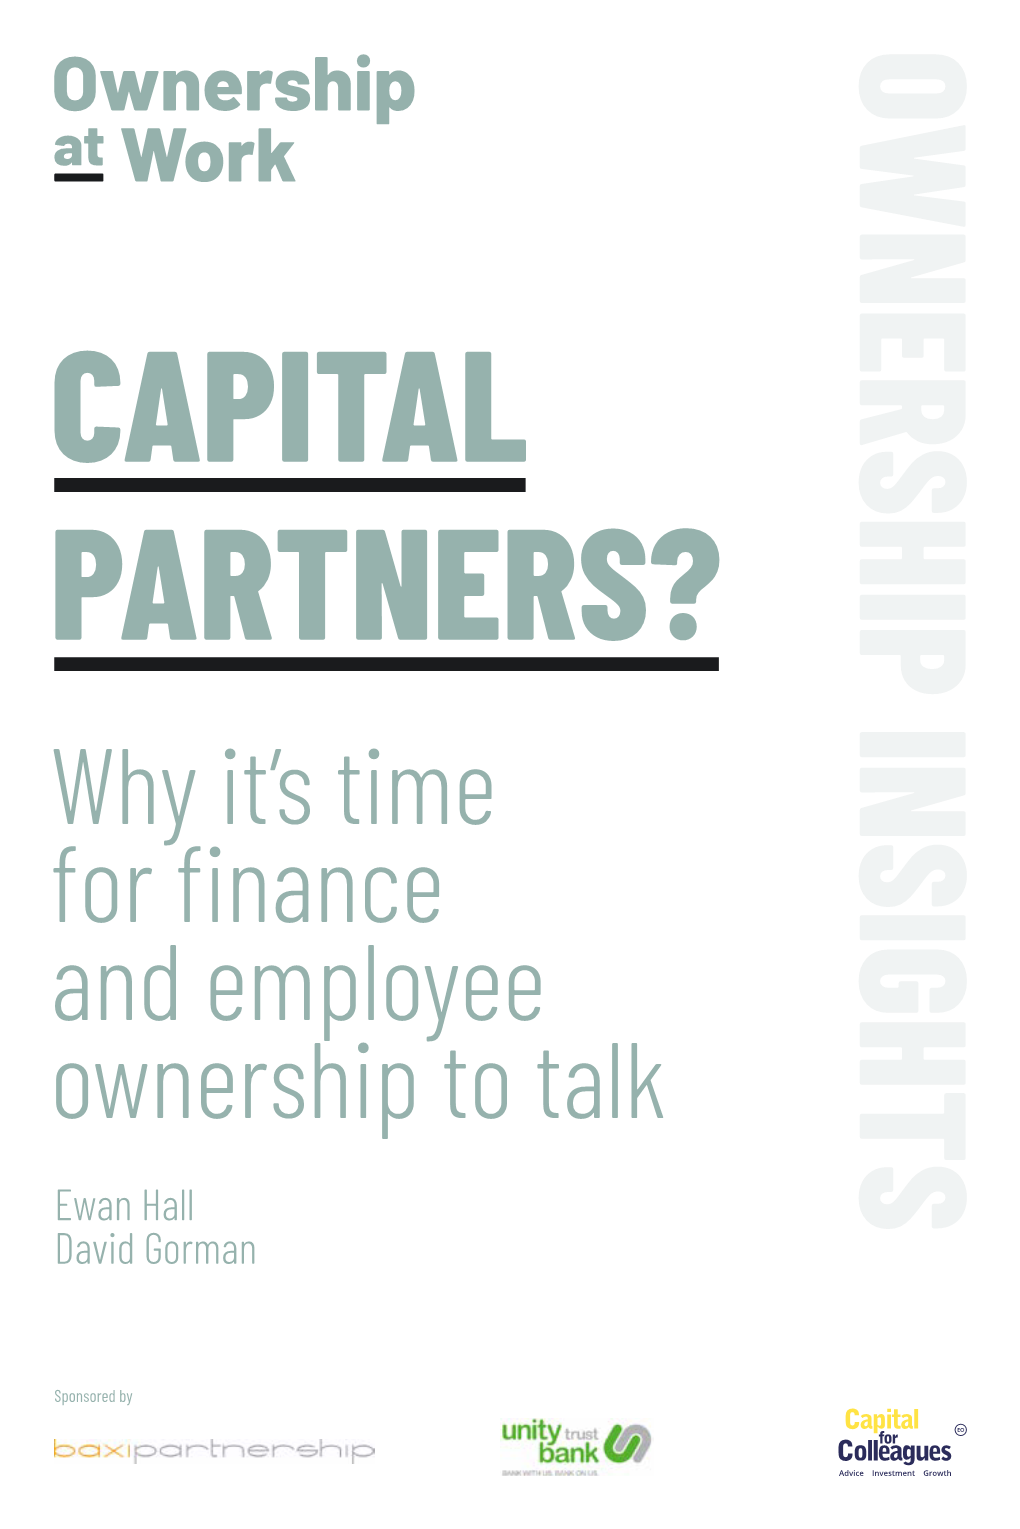 Why It's Time for Finance and Employee Ownership to Talk